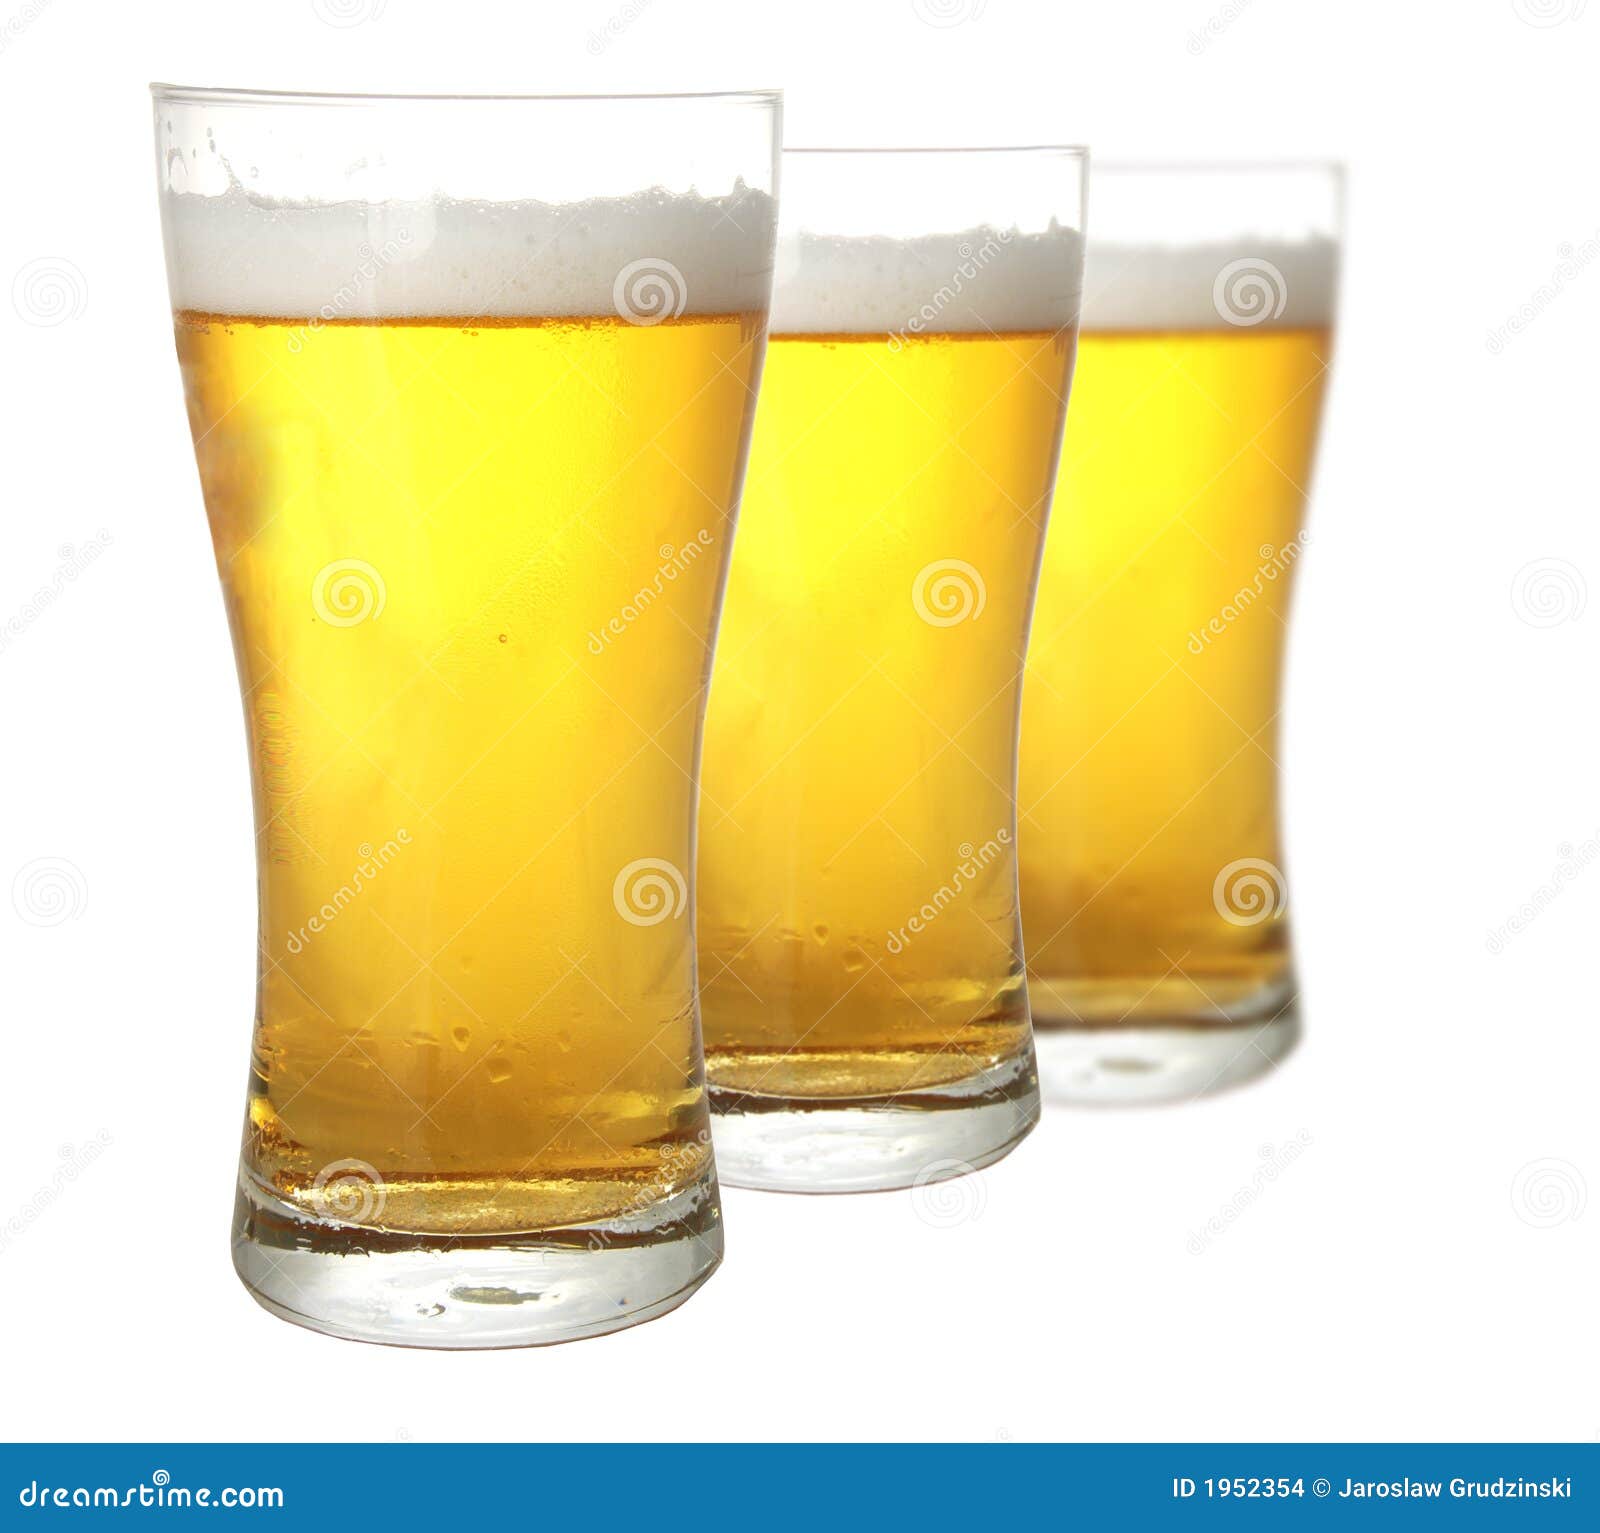 Three Glasses Of Beer Stock Images - Image: 1952354